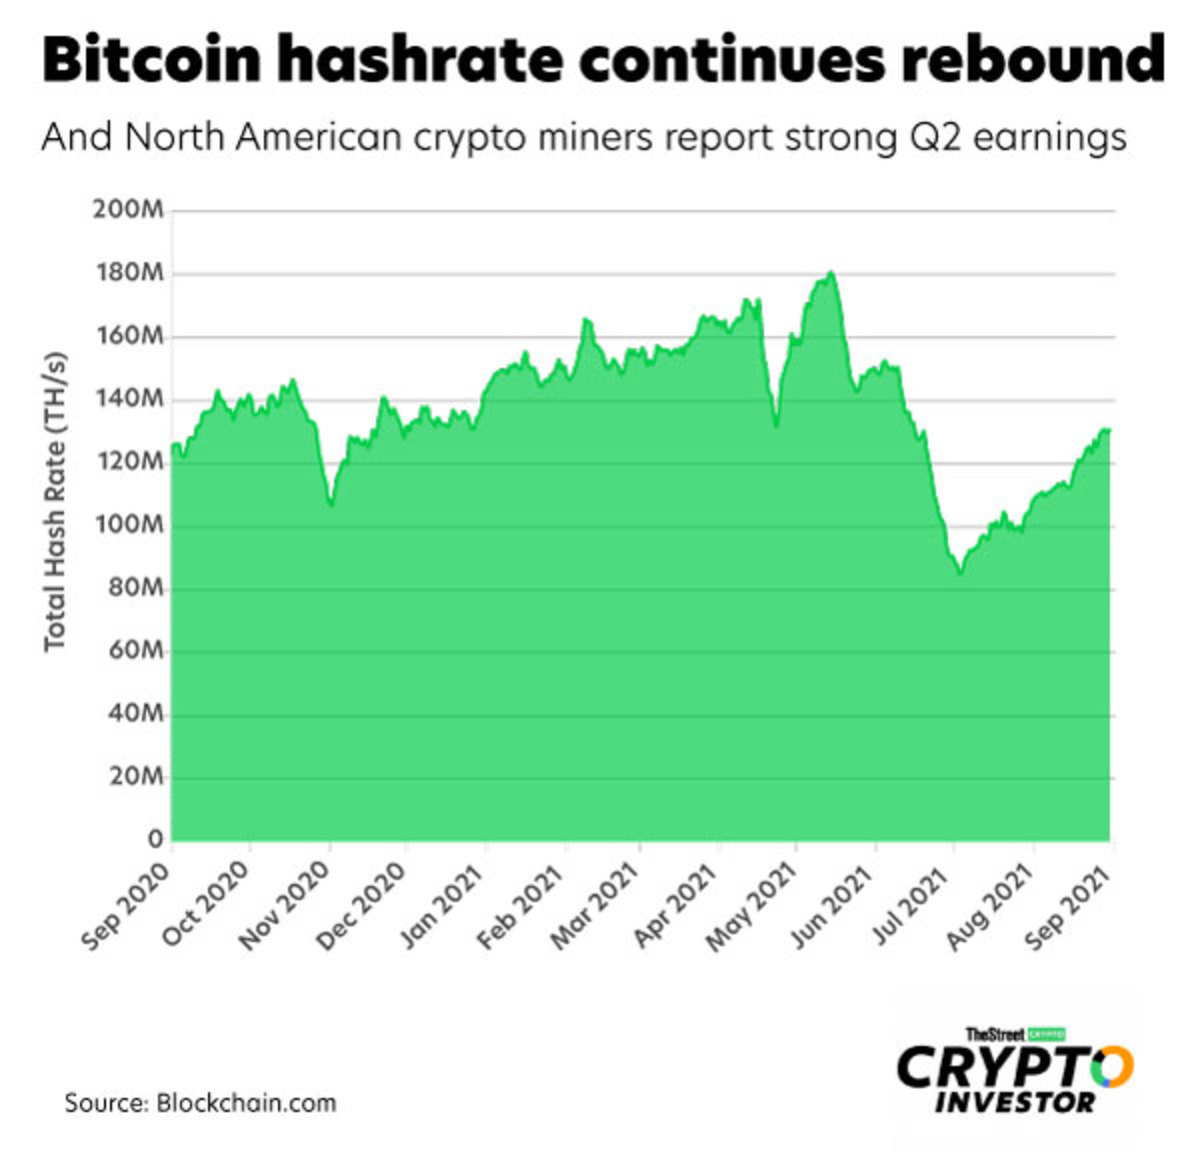 Are cryptocurrencies hashrates going up or down btc last date 2016